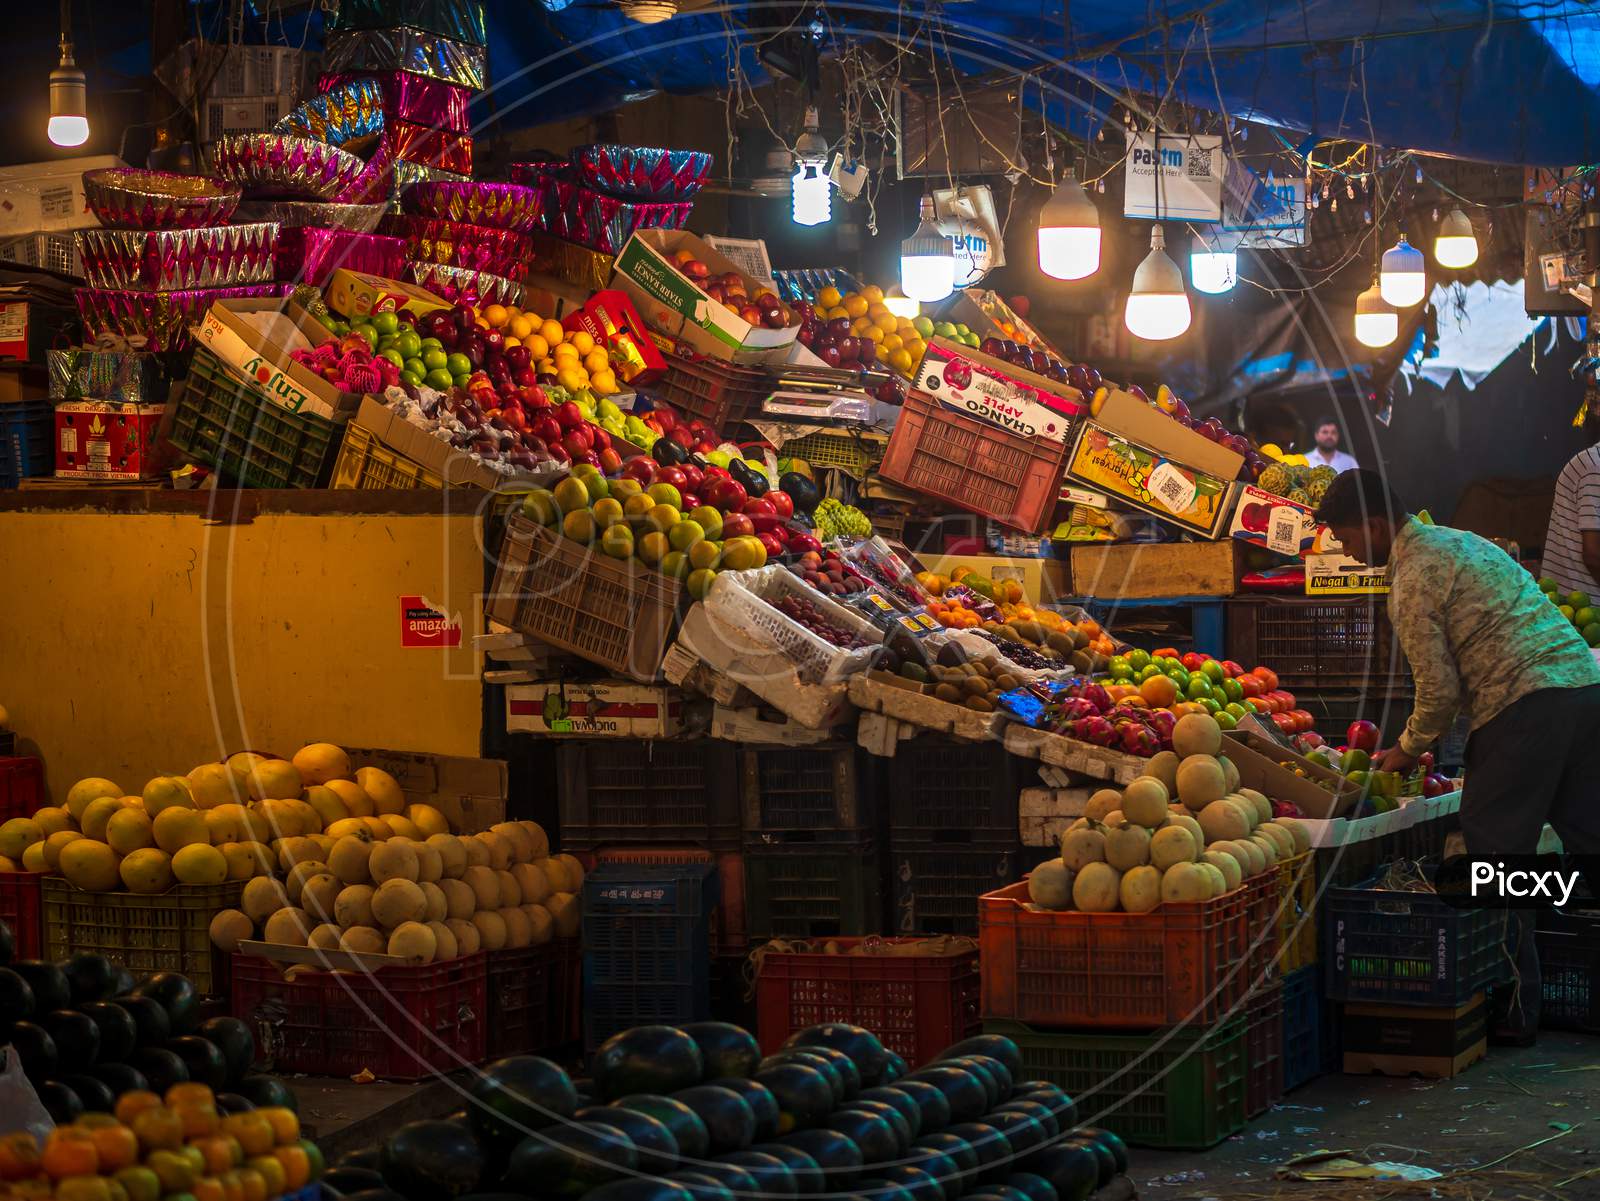 Indian Fruit Vendor At Crowford Market. Fruit Vendors Are Sold In Road Side Shops Through Indian Cities & Towns.